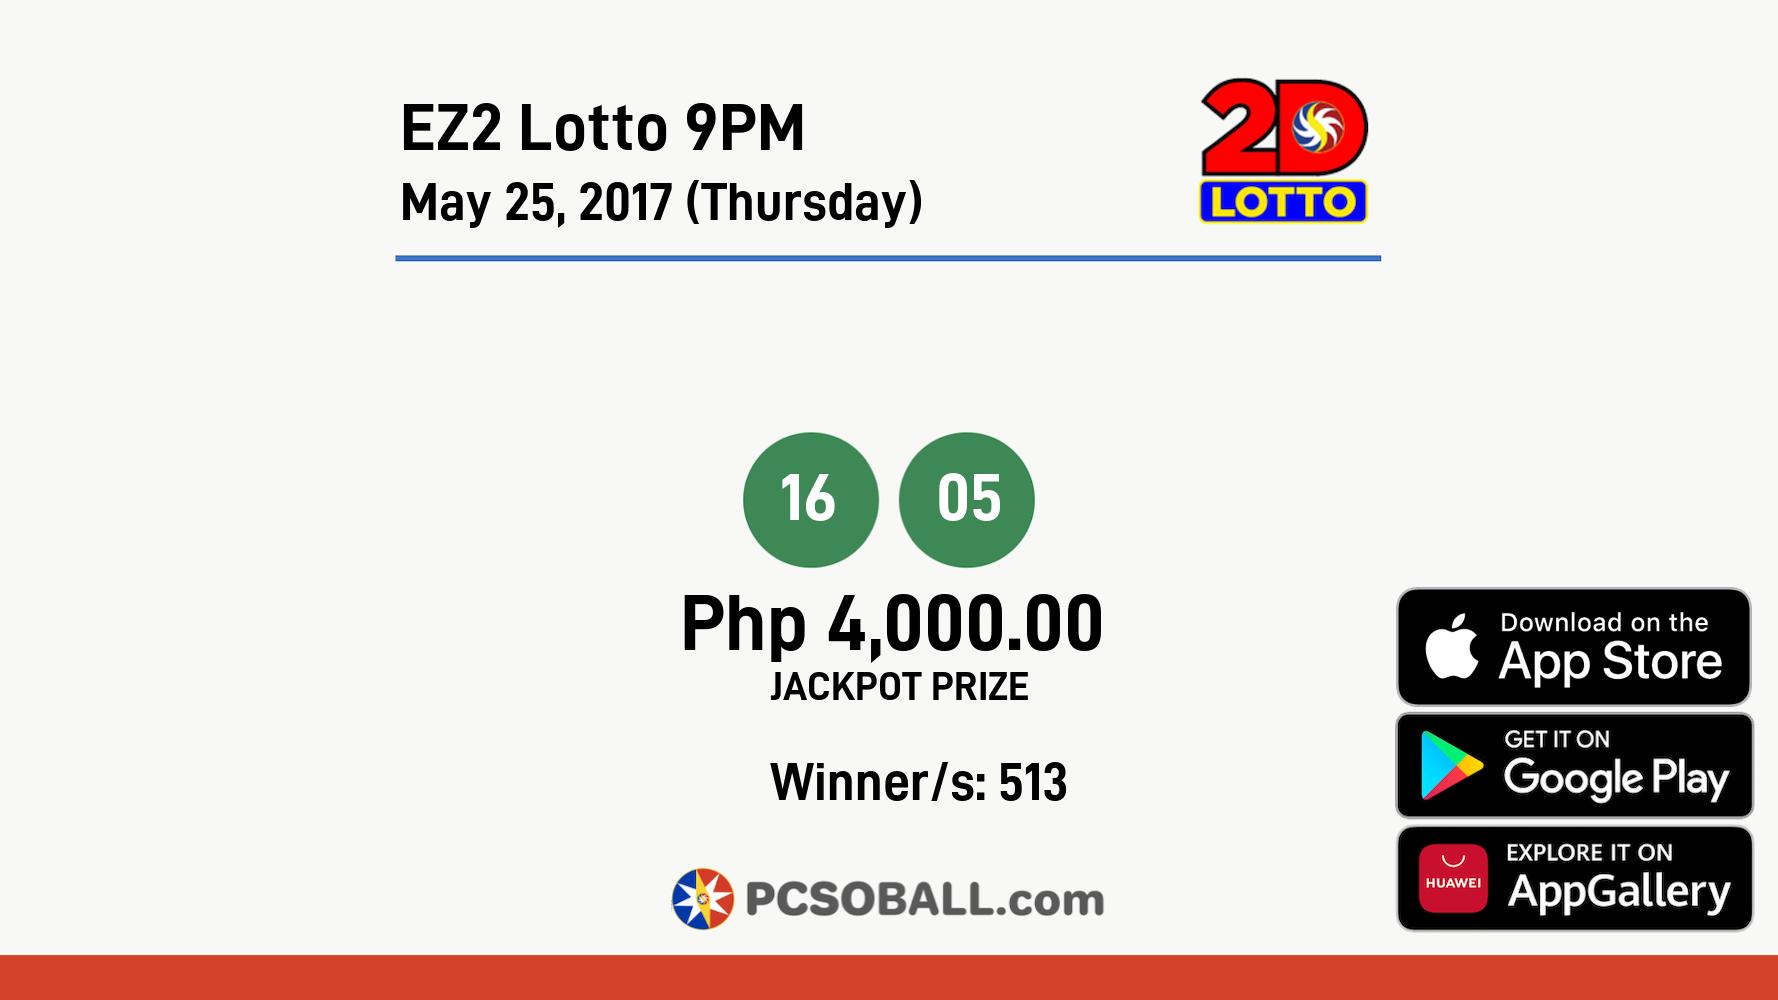 EZ2 Lotto 9PM May 25, 2017 (Thursday) Result